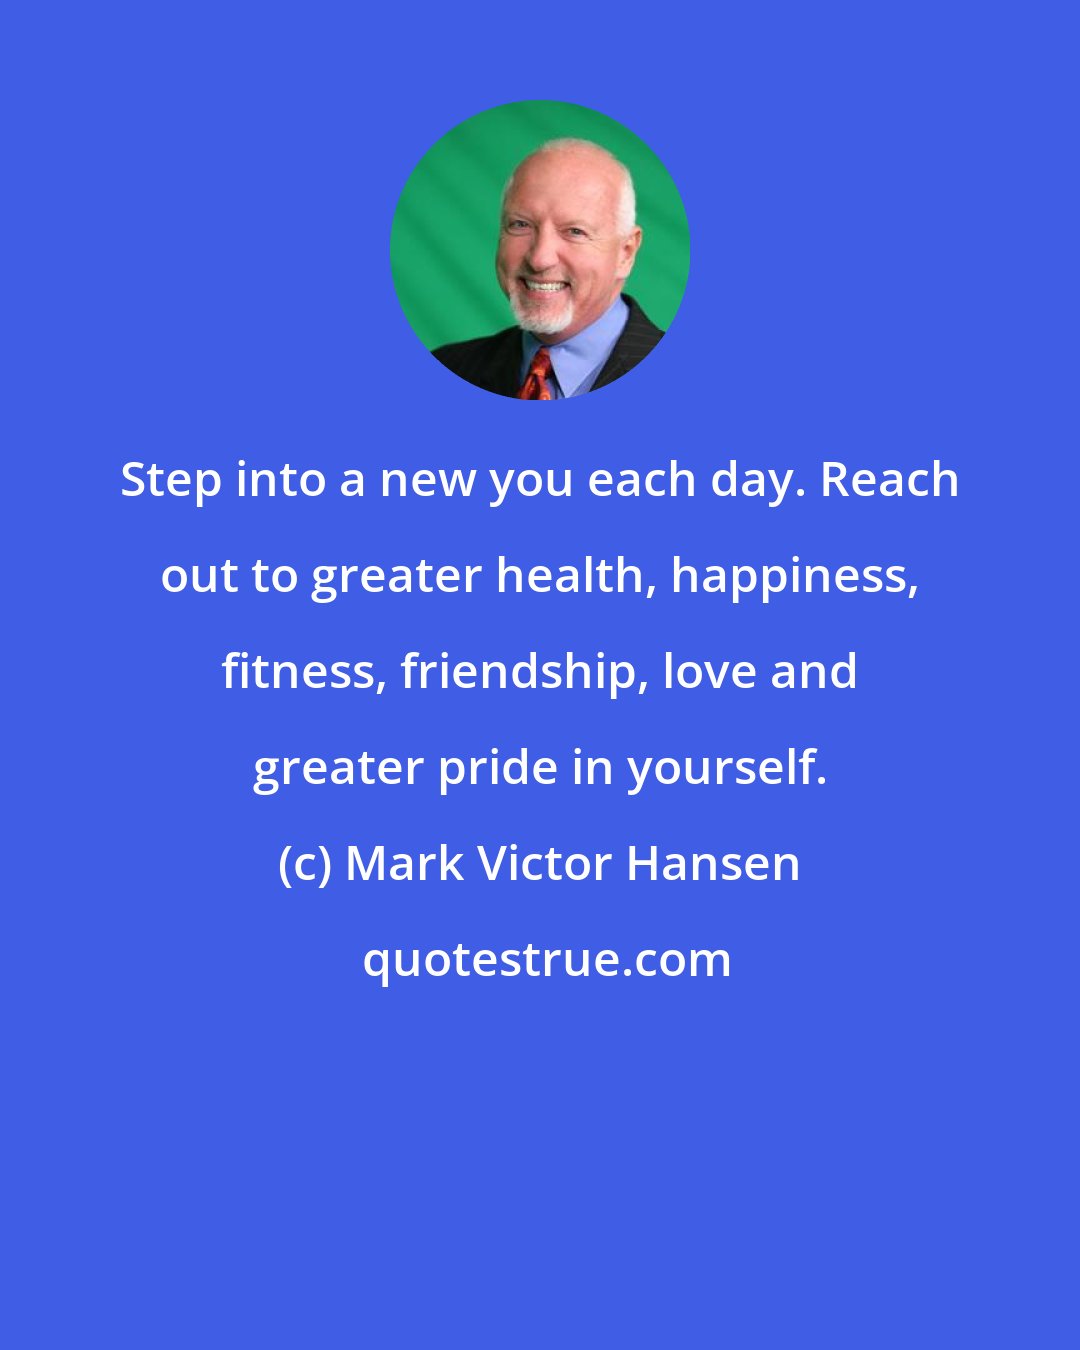 Mark Victor Hansen: Step into a new you each day. Reach out to greater health, happiness, fitness, friendship, love and greater pride in yourself.